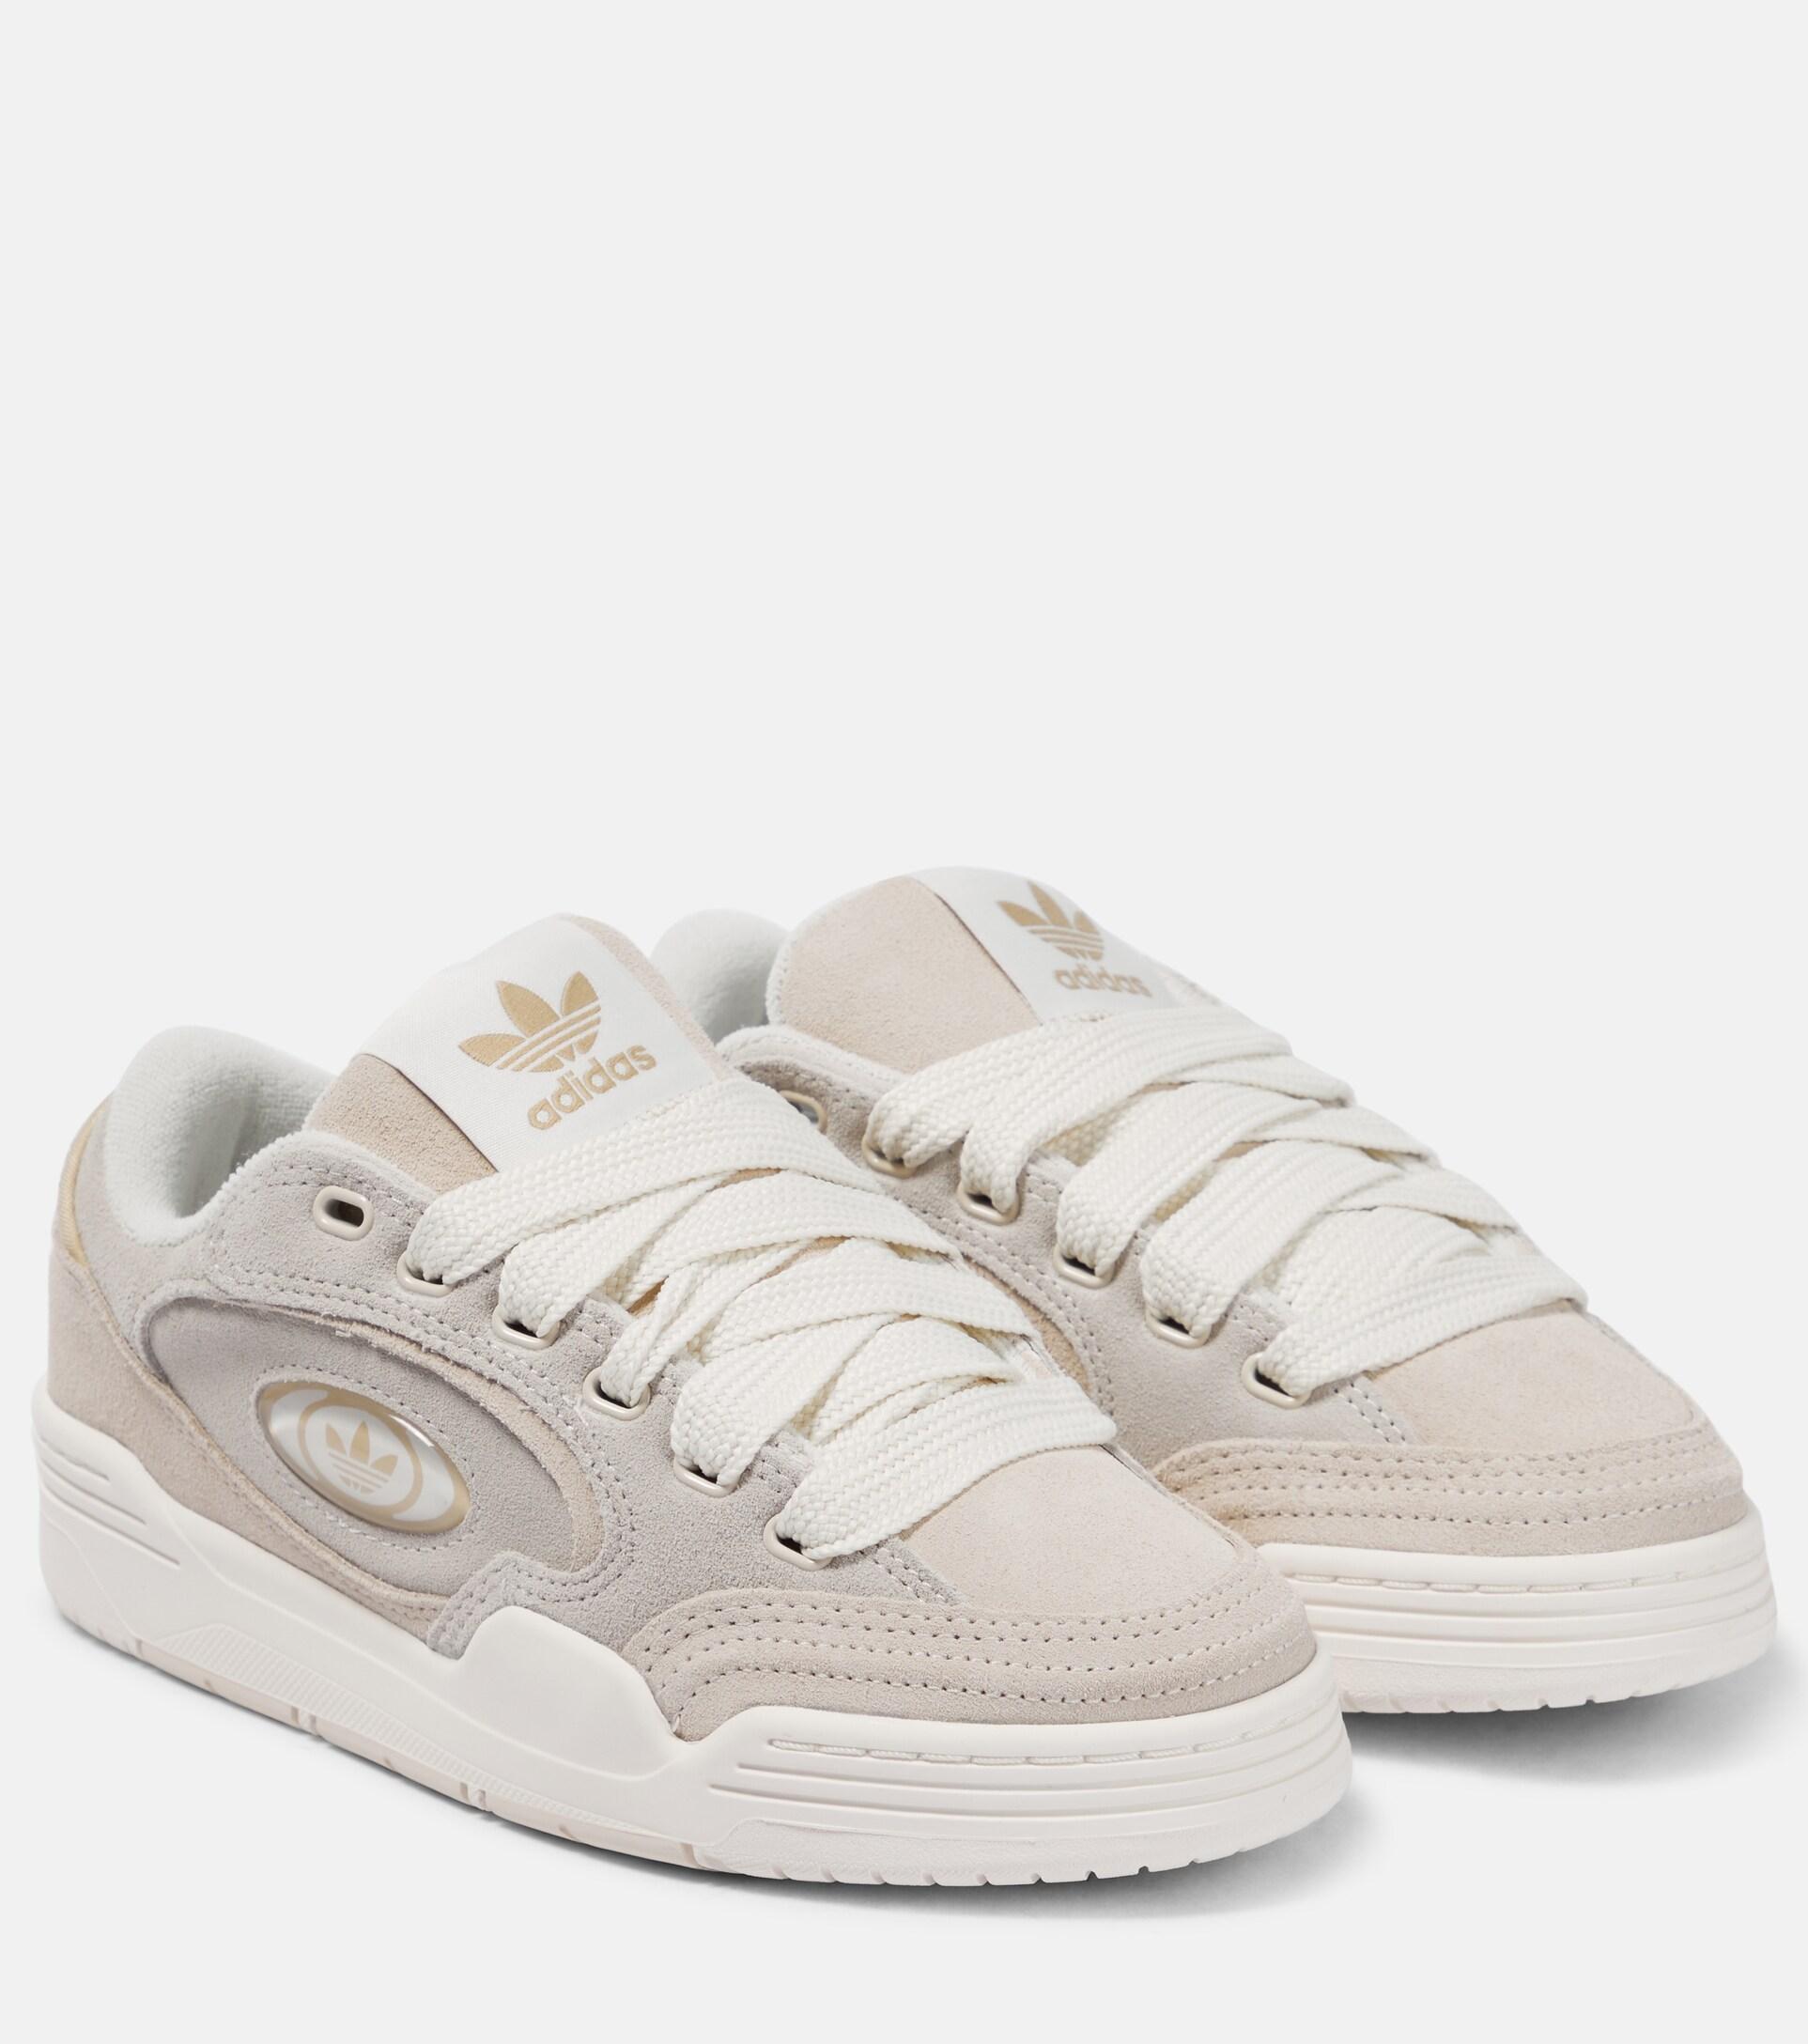 adidas Adi2000 X Suede Sneakers in White | Lyst